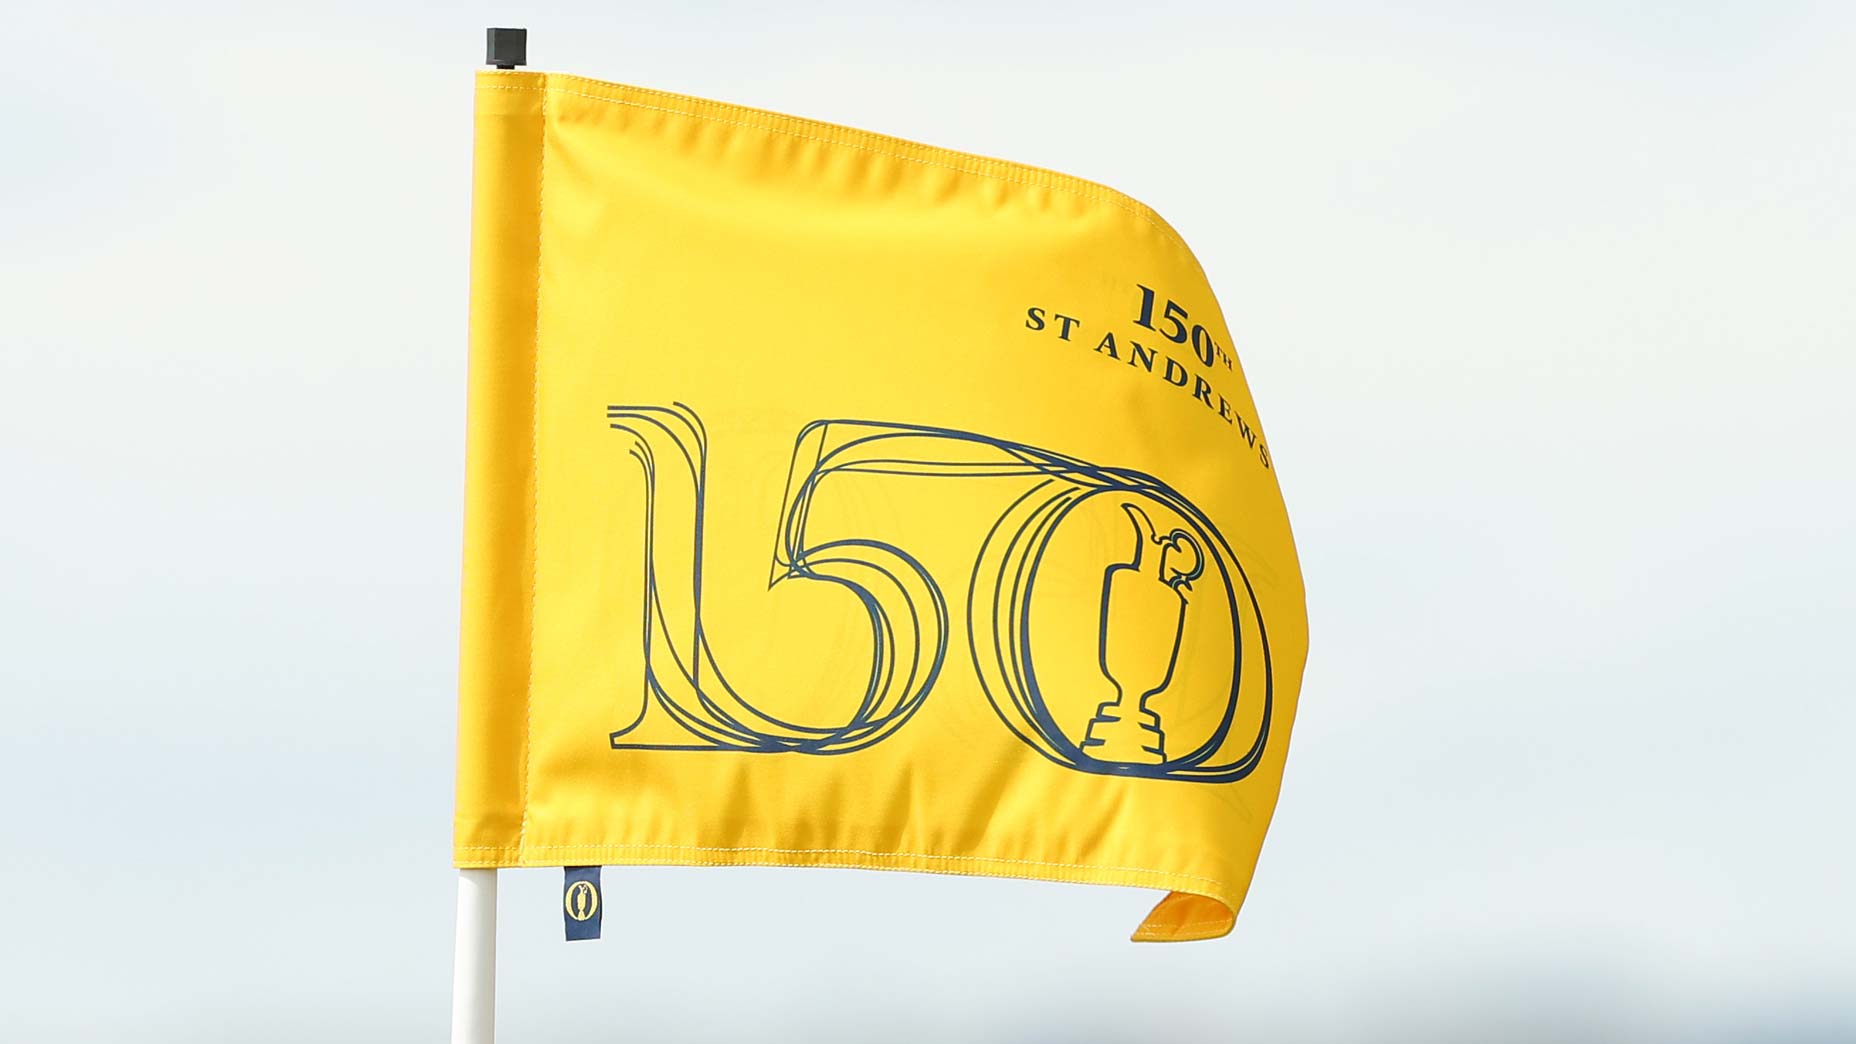 The flag blows in the wind at the 2022 Open Championship.